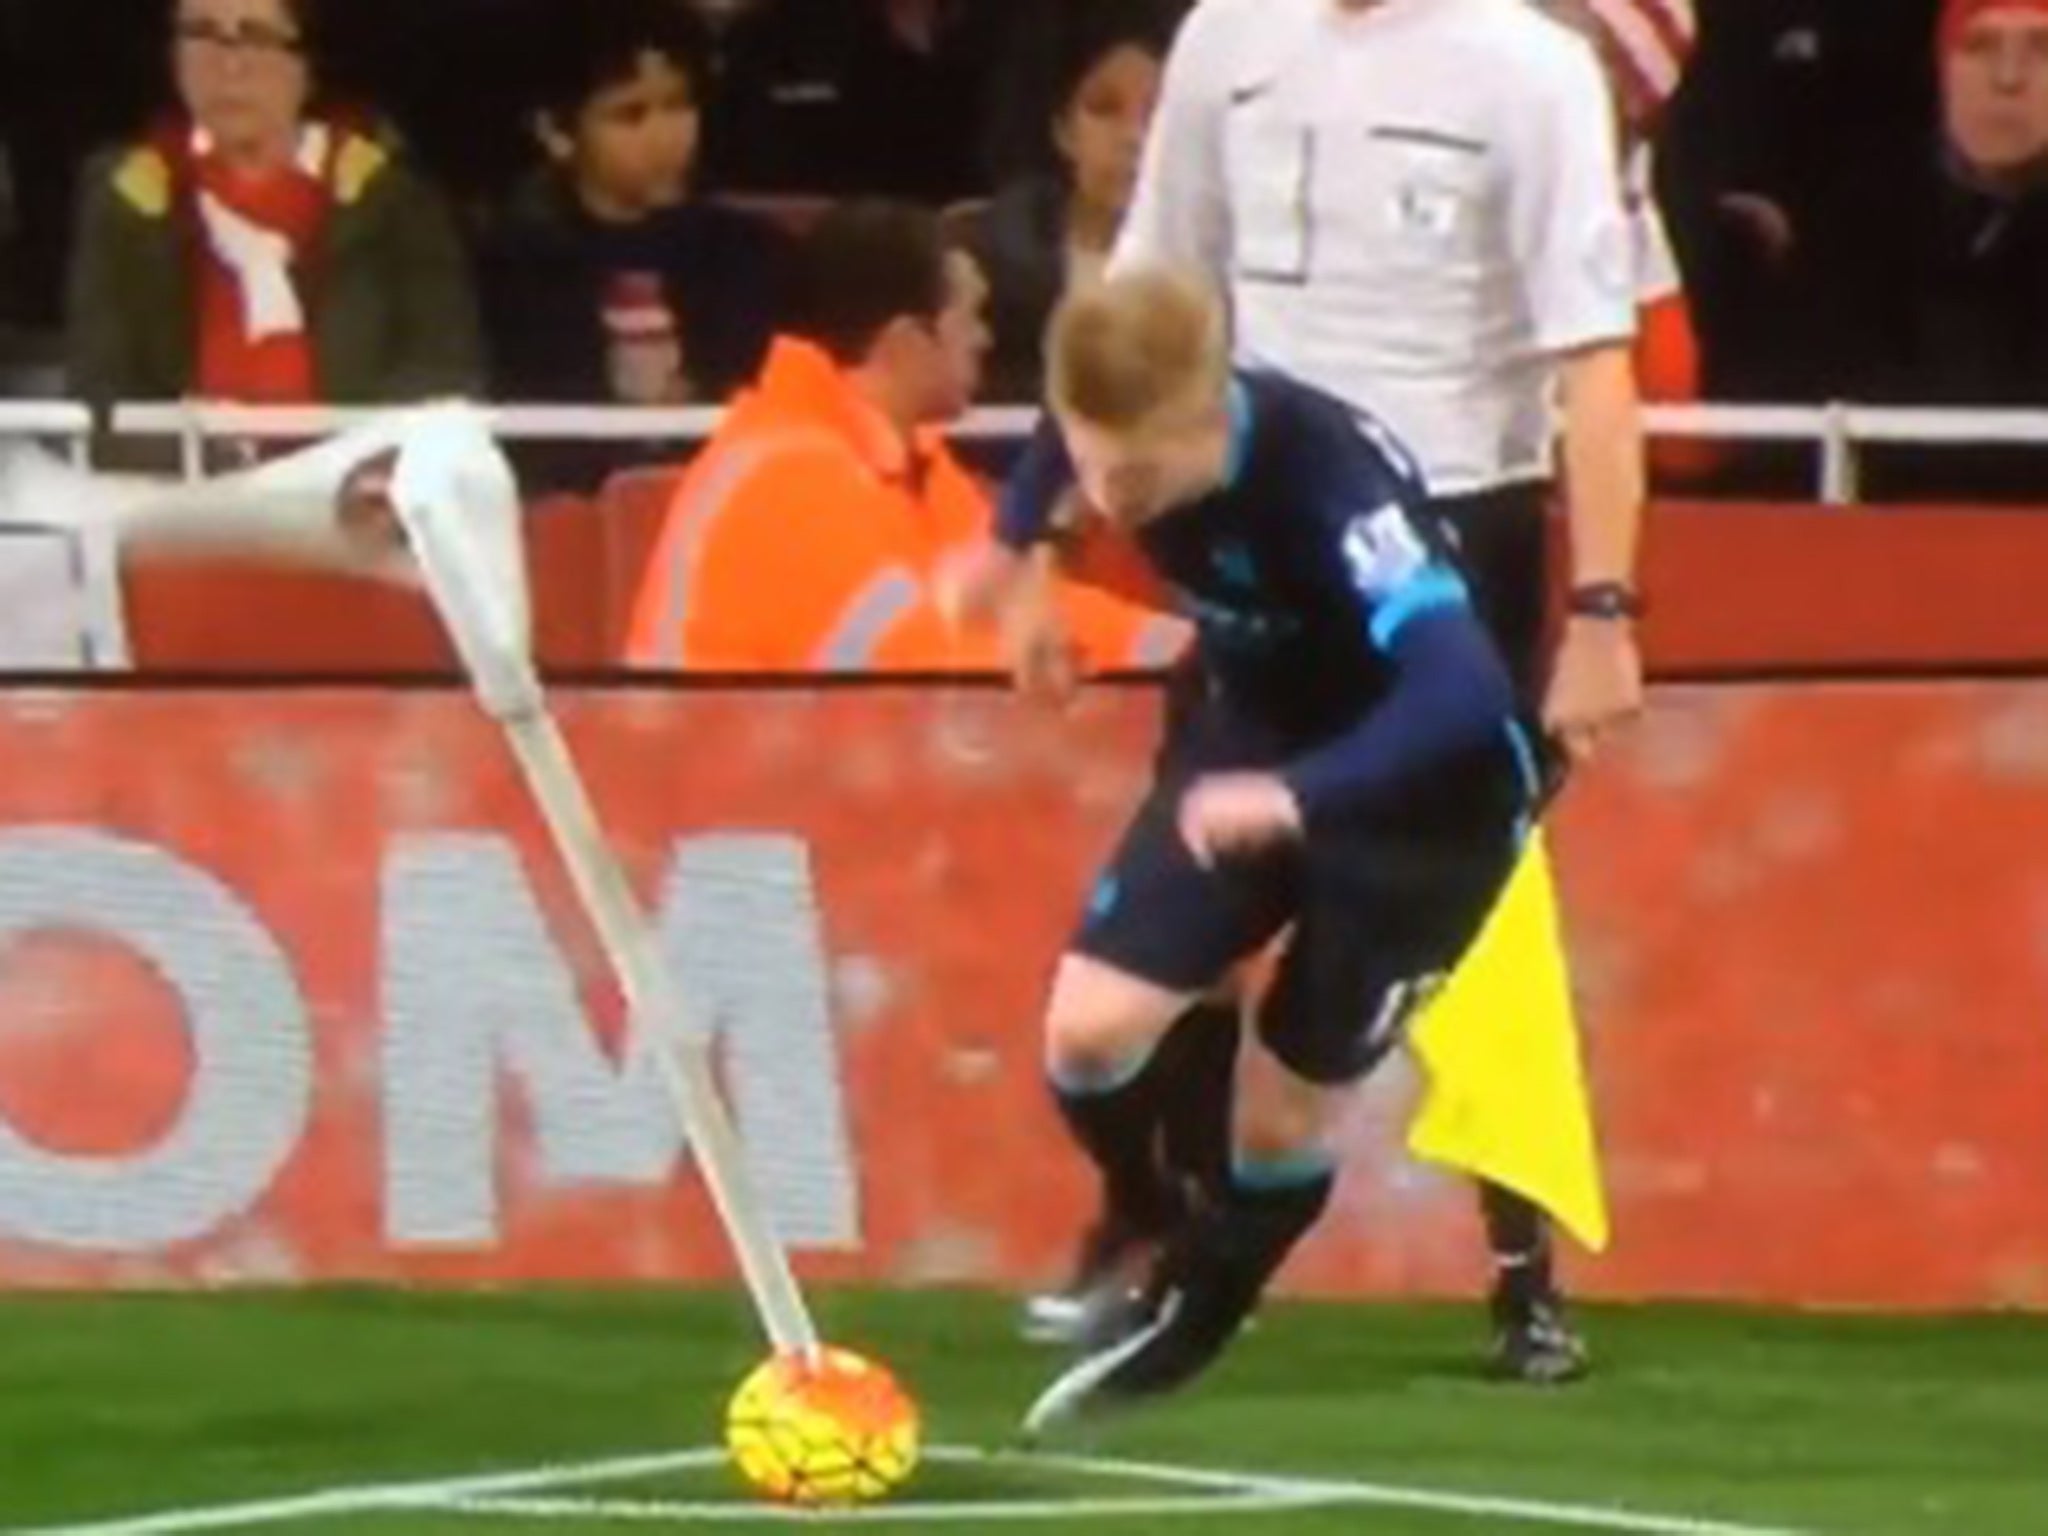 Kevin De Bruyne nearly trips on the corner flag